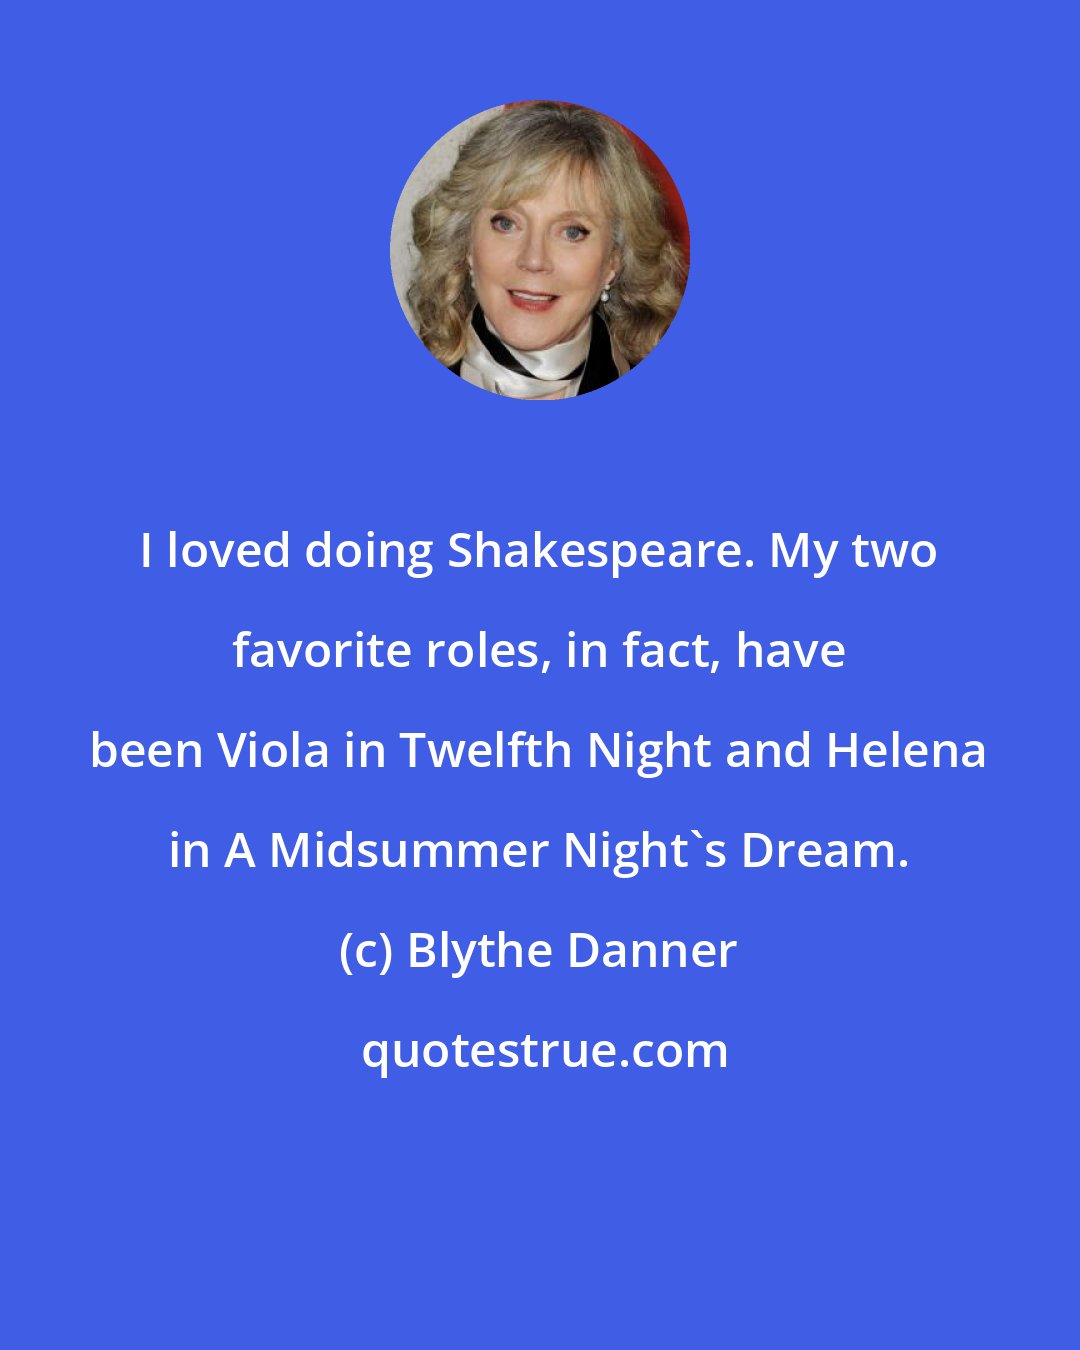 Blythe Danner: I loved doing Shakespeare. My two favorite roles, in fact, have been Viola in Twelfth Night and Helena in A Midsummer Night's Dream.